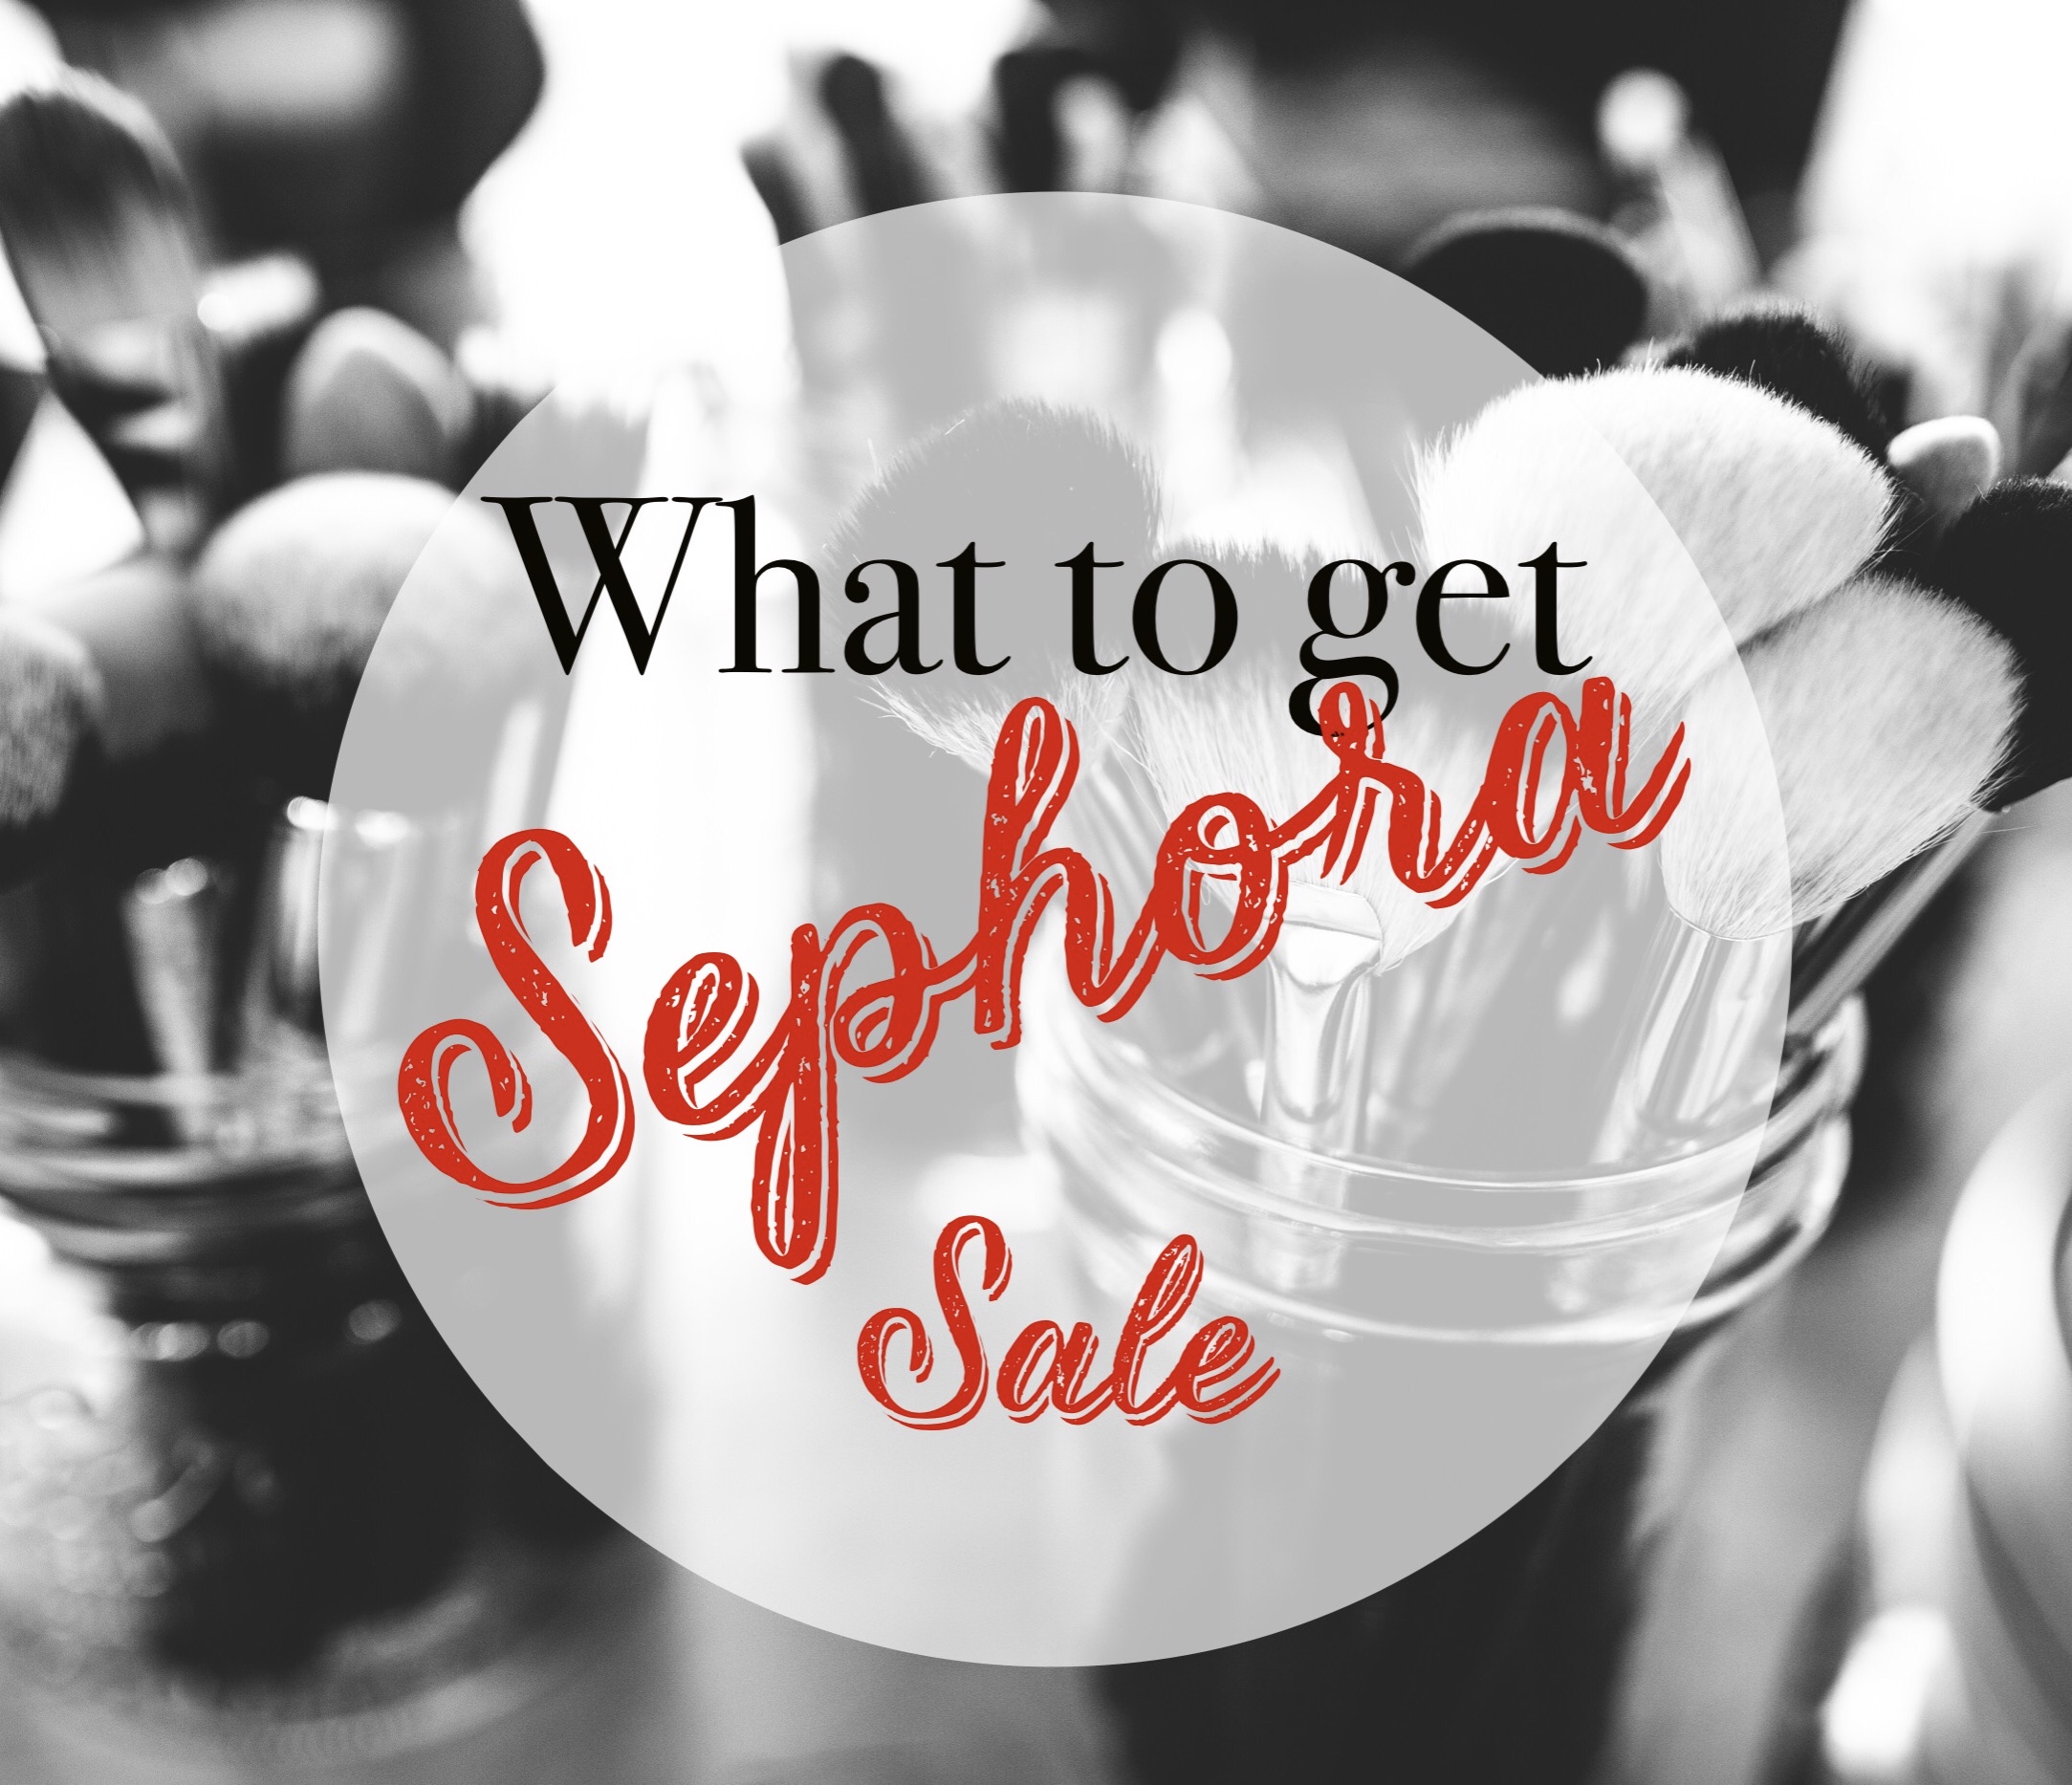 sephora sale 20% off vib, beauty insider rouge, what to buy in sephora holiday gift set ideas buy shop makeup